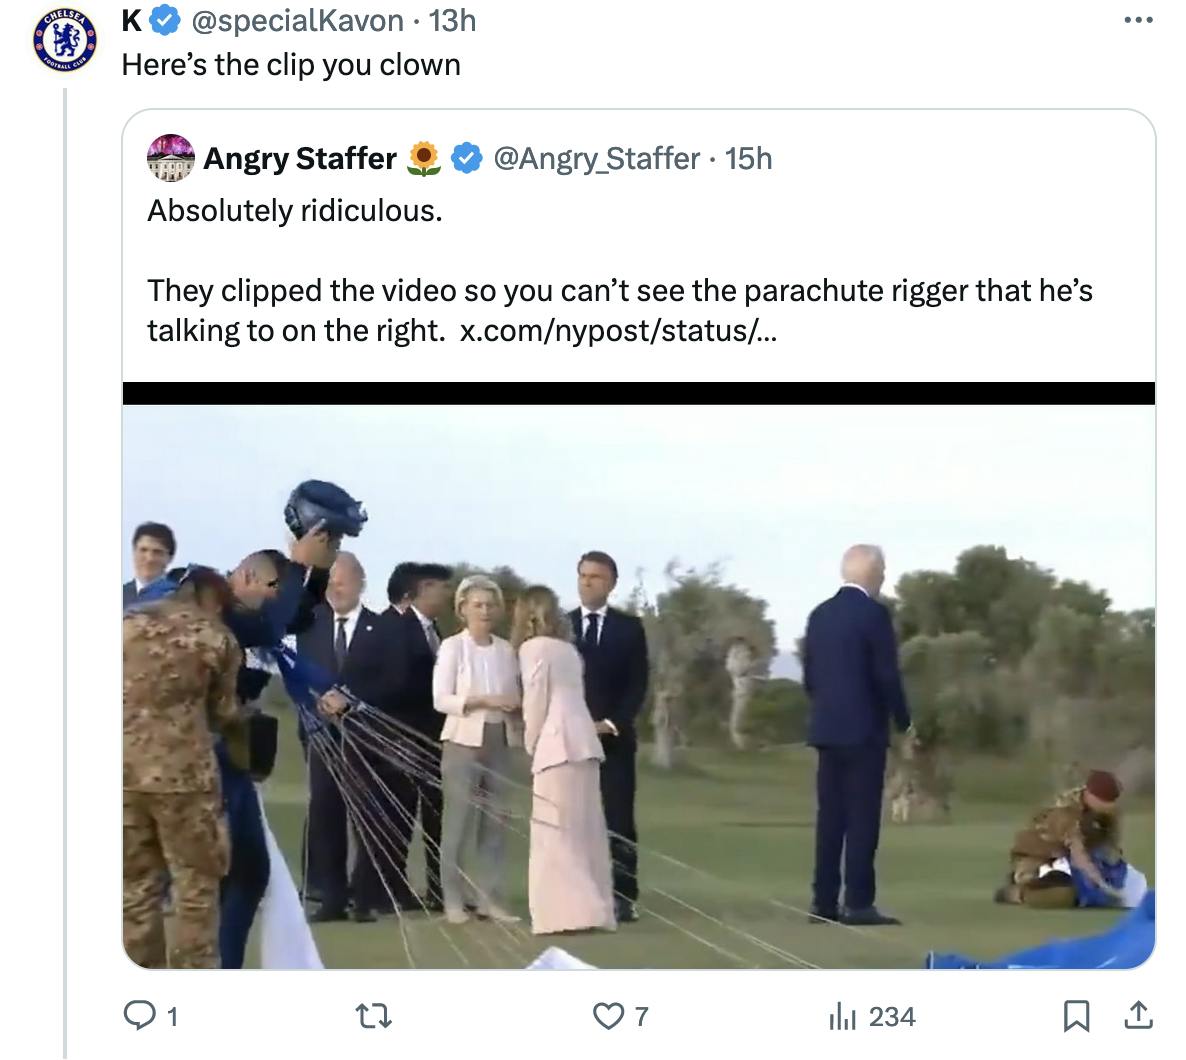 Twitter @specialKavon: Here’s the clip you clown with a photo of Biden speaking to a parachuter